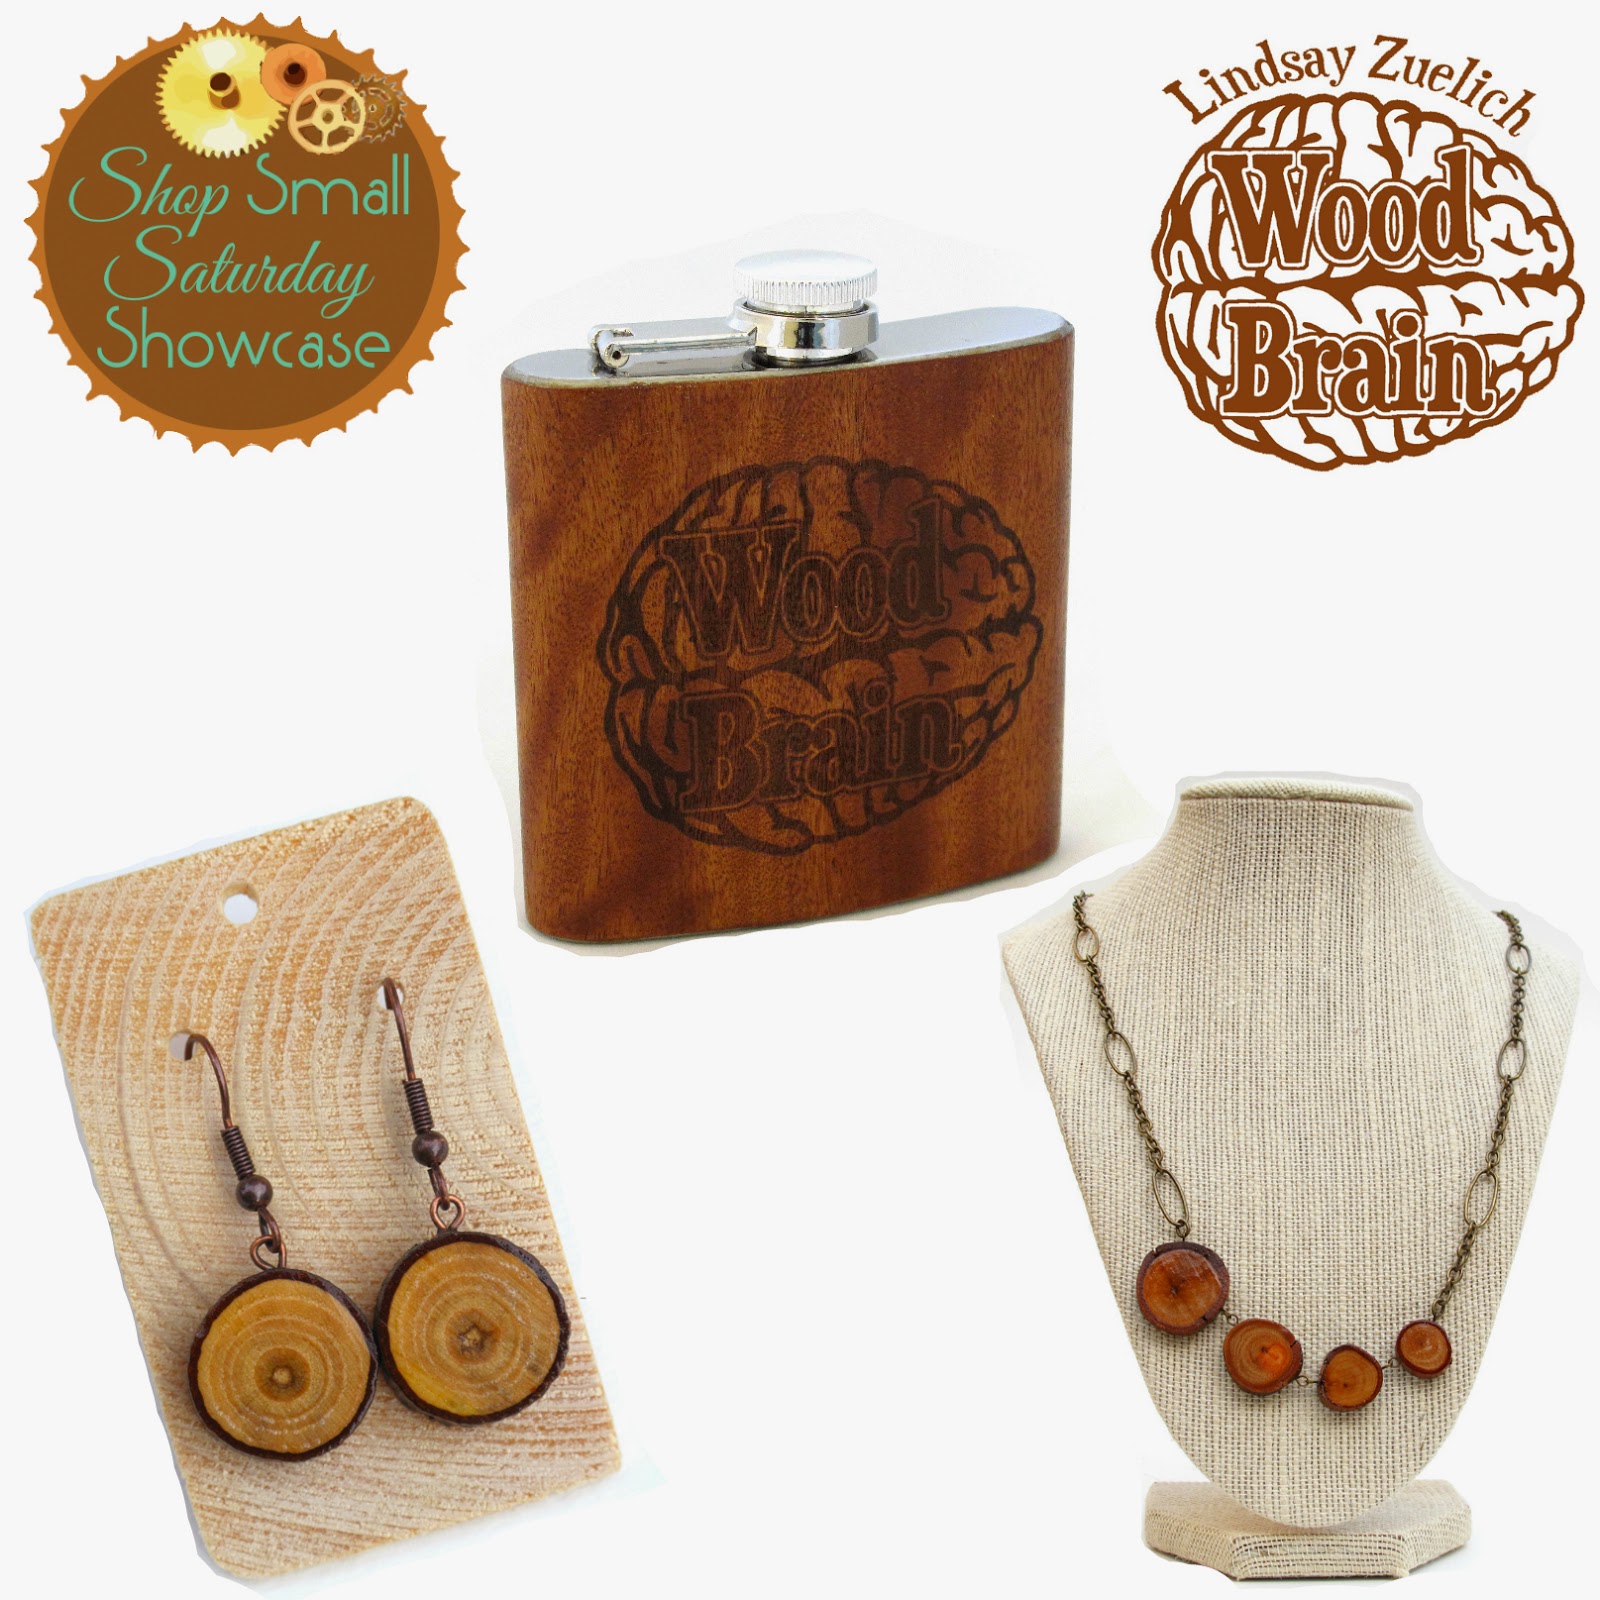 Wood Brain feature and GIVEAWAY! on Shop Small Saturday at Diane's Vintage Zest!